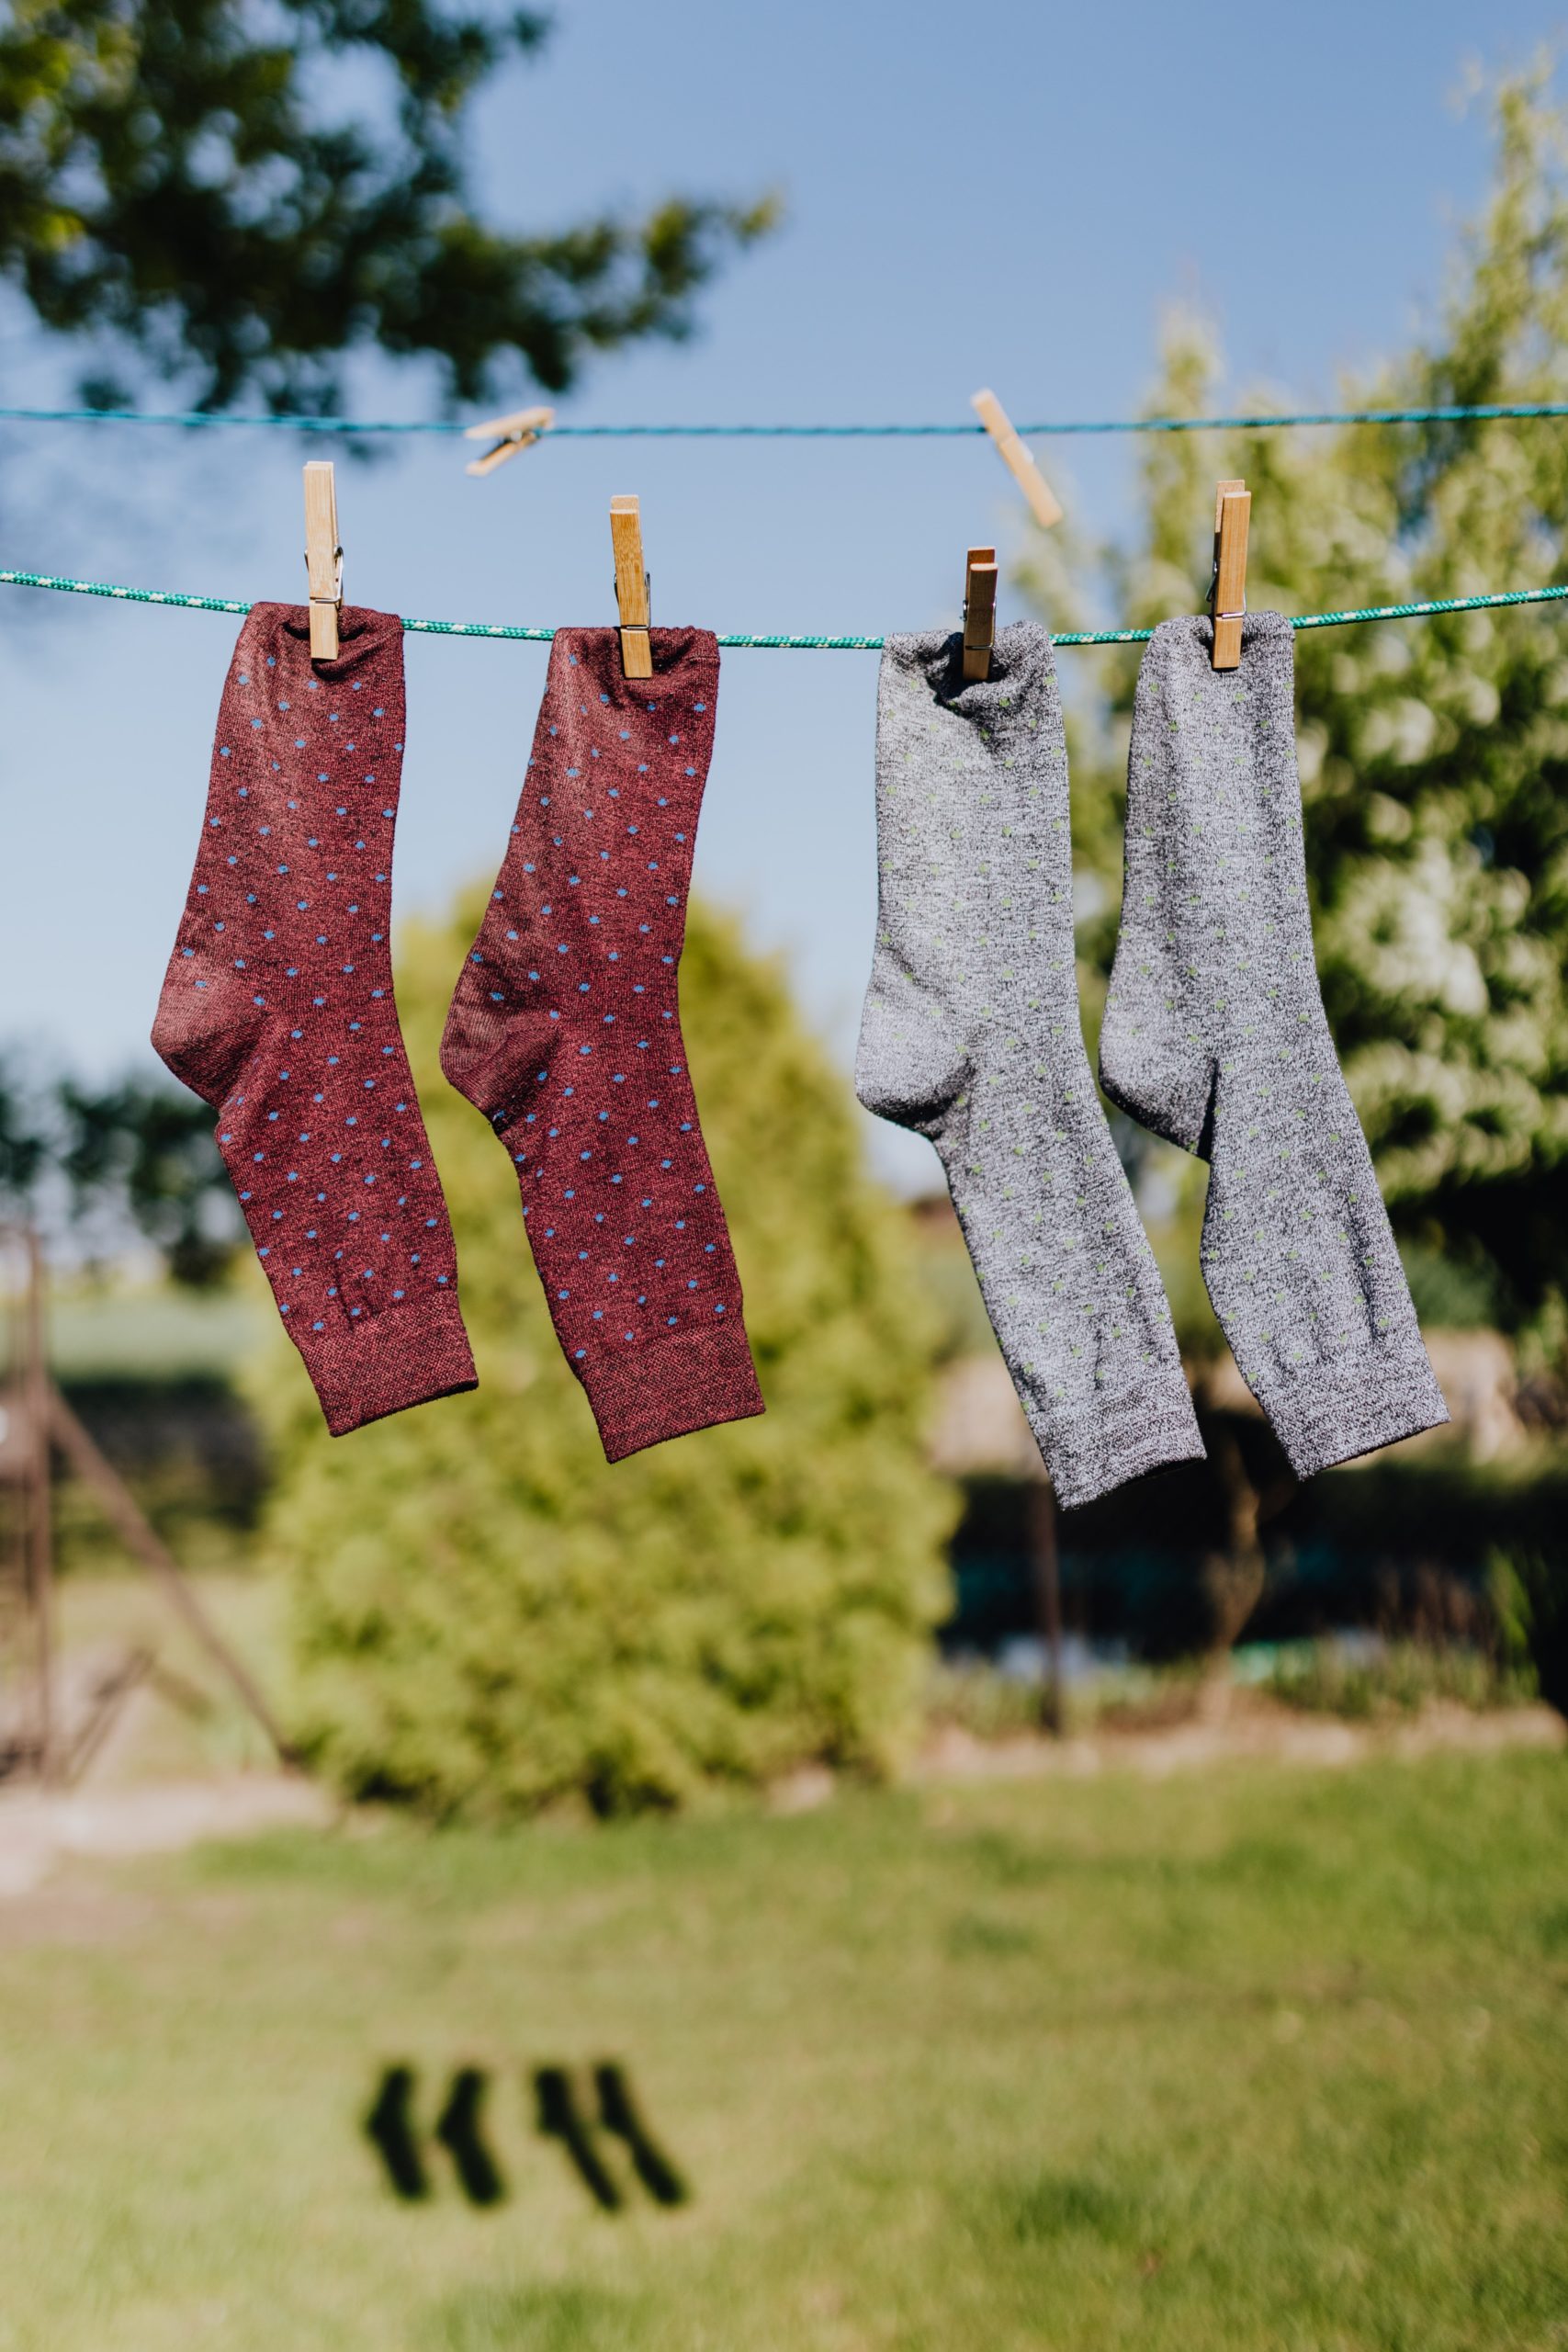 4 Ways to Take Care of Your Premium Quality Socks